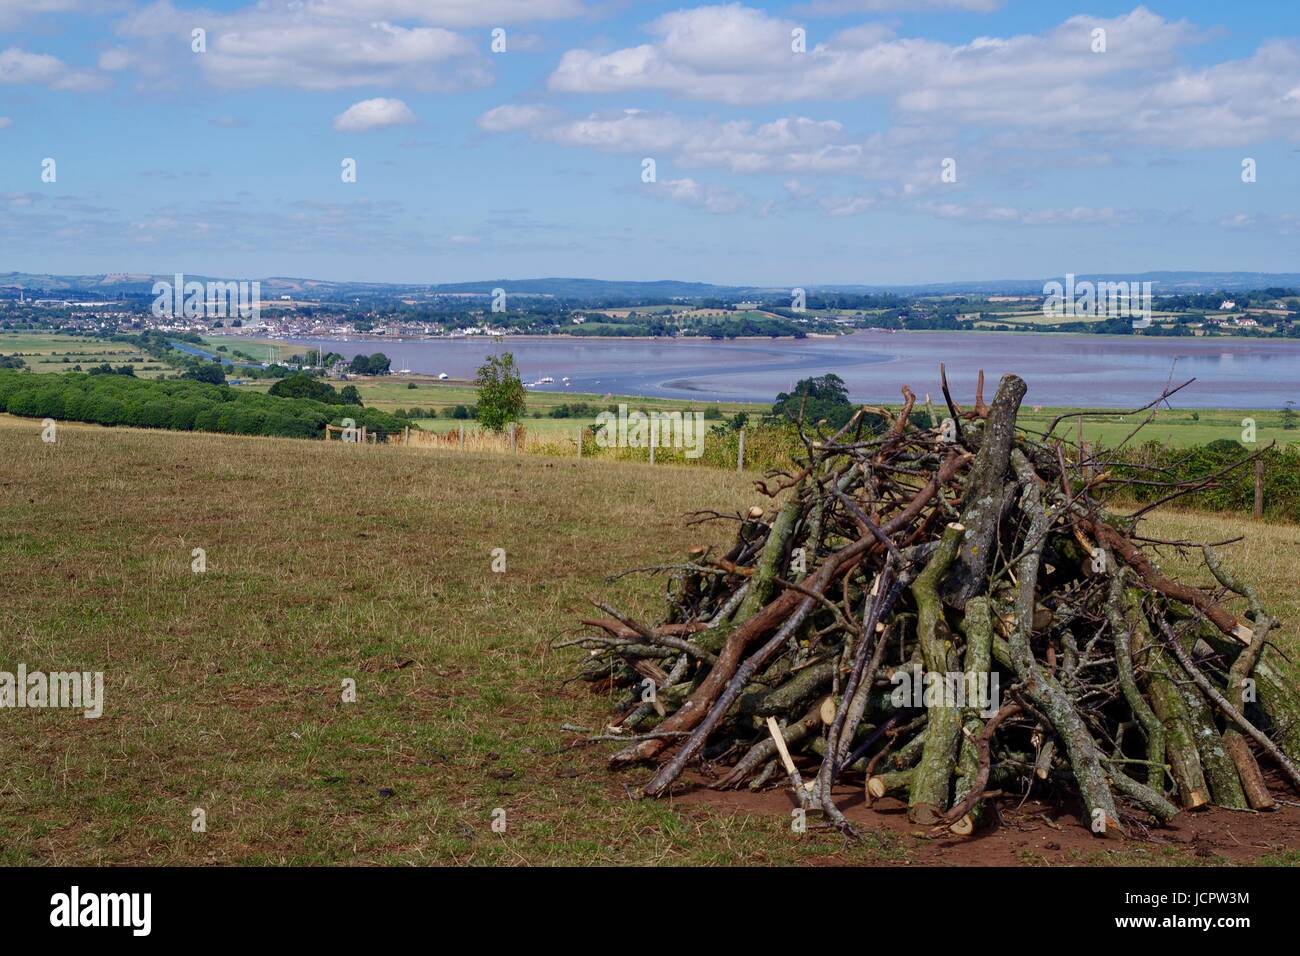 Unlit Bonfire Lay of Woodland Branches in a Field Overlooking the Exe Estuary. Powderham Castle, Devon, UK. July, 2016. Stock Photo